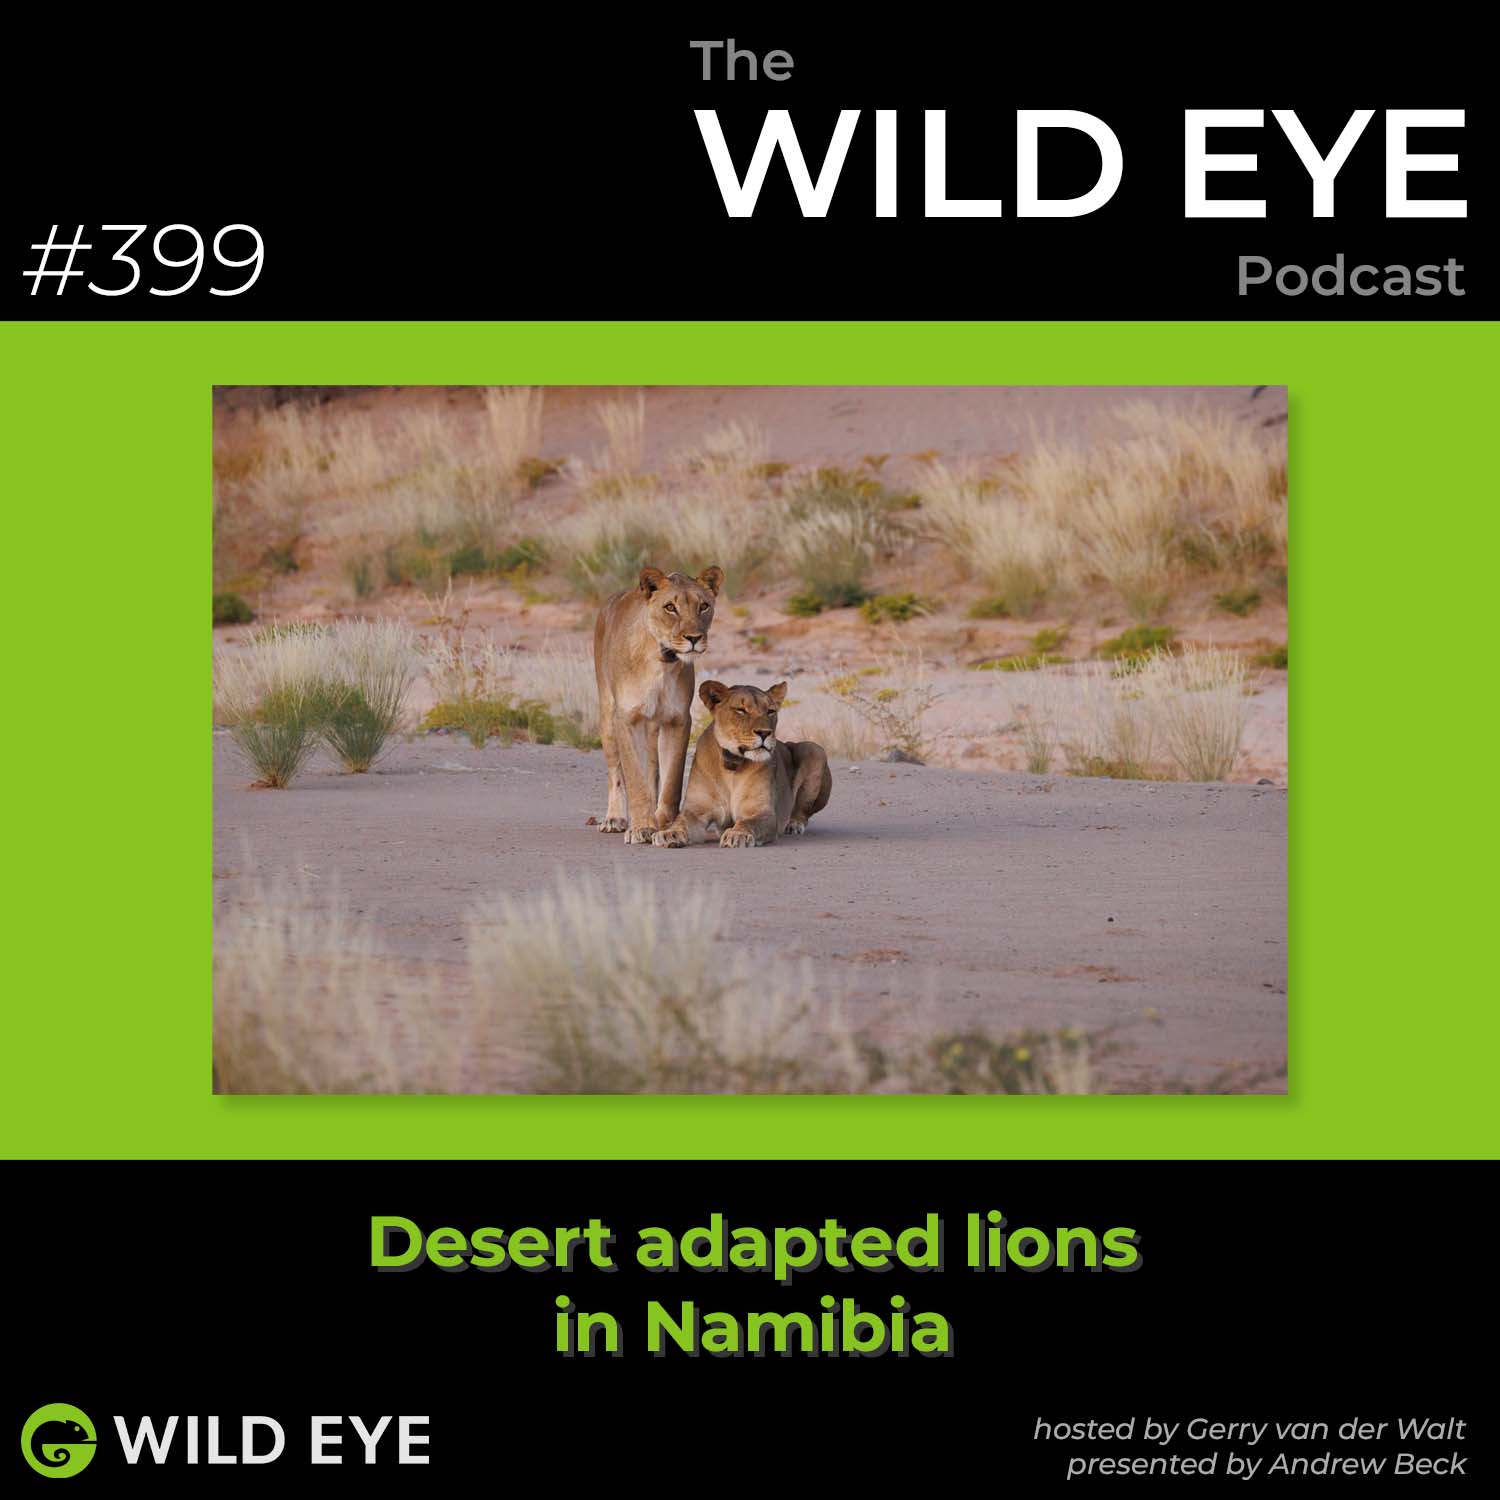 #399 - Desert adapted lions in Namibia